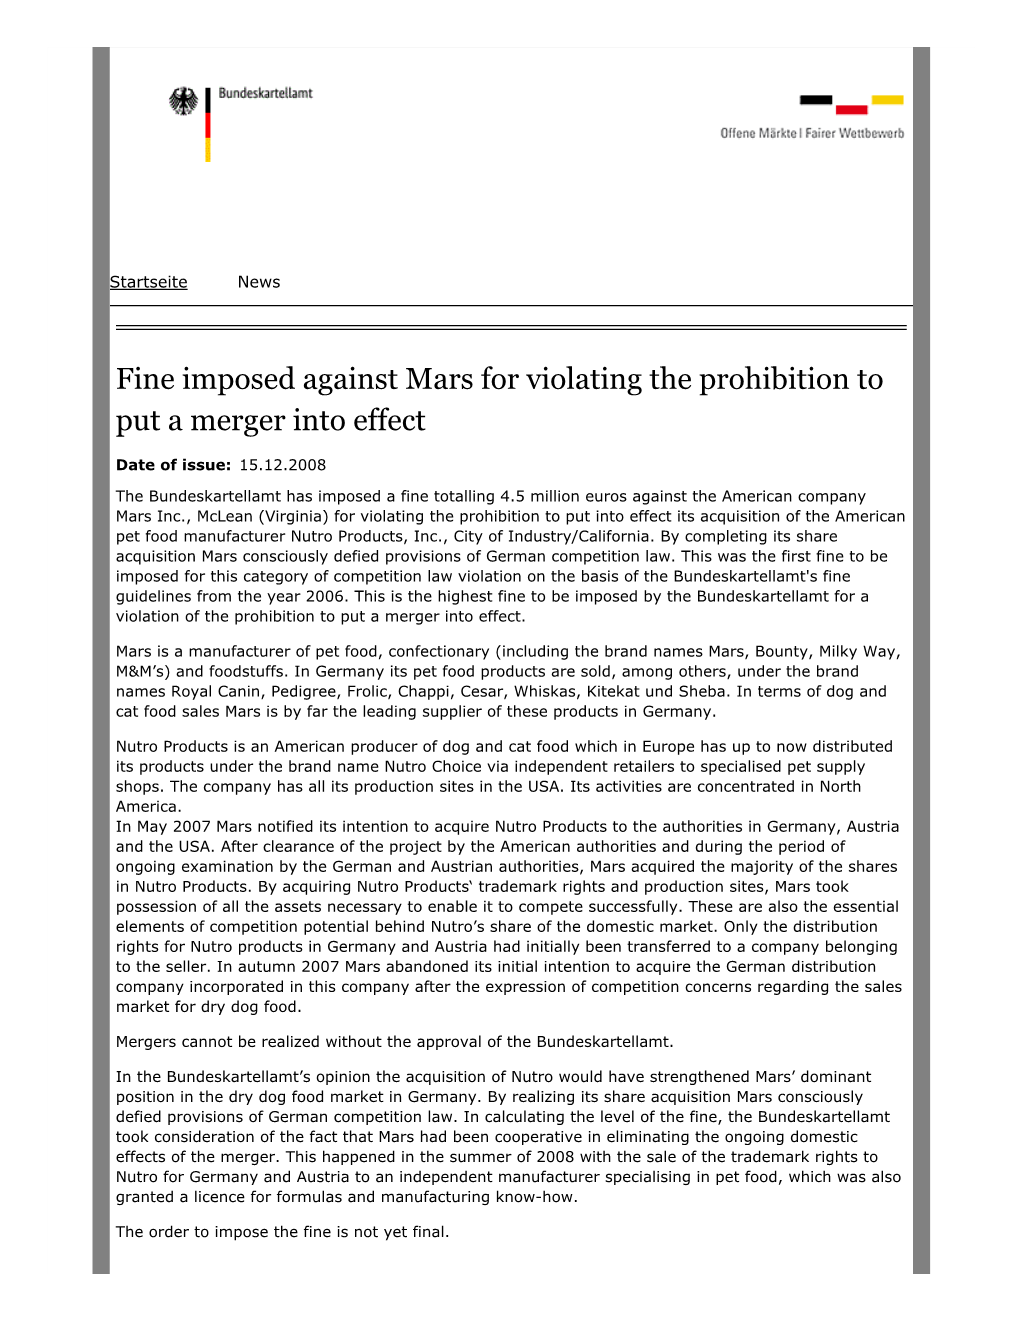 Fine Imposed Against Mars for Violating the Prohibition to Put a Merger Into Effect